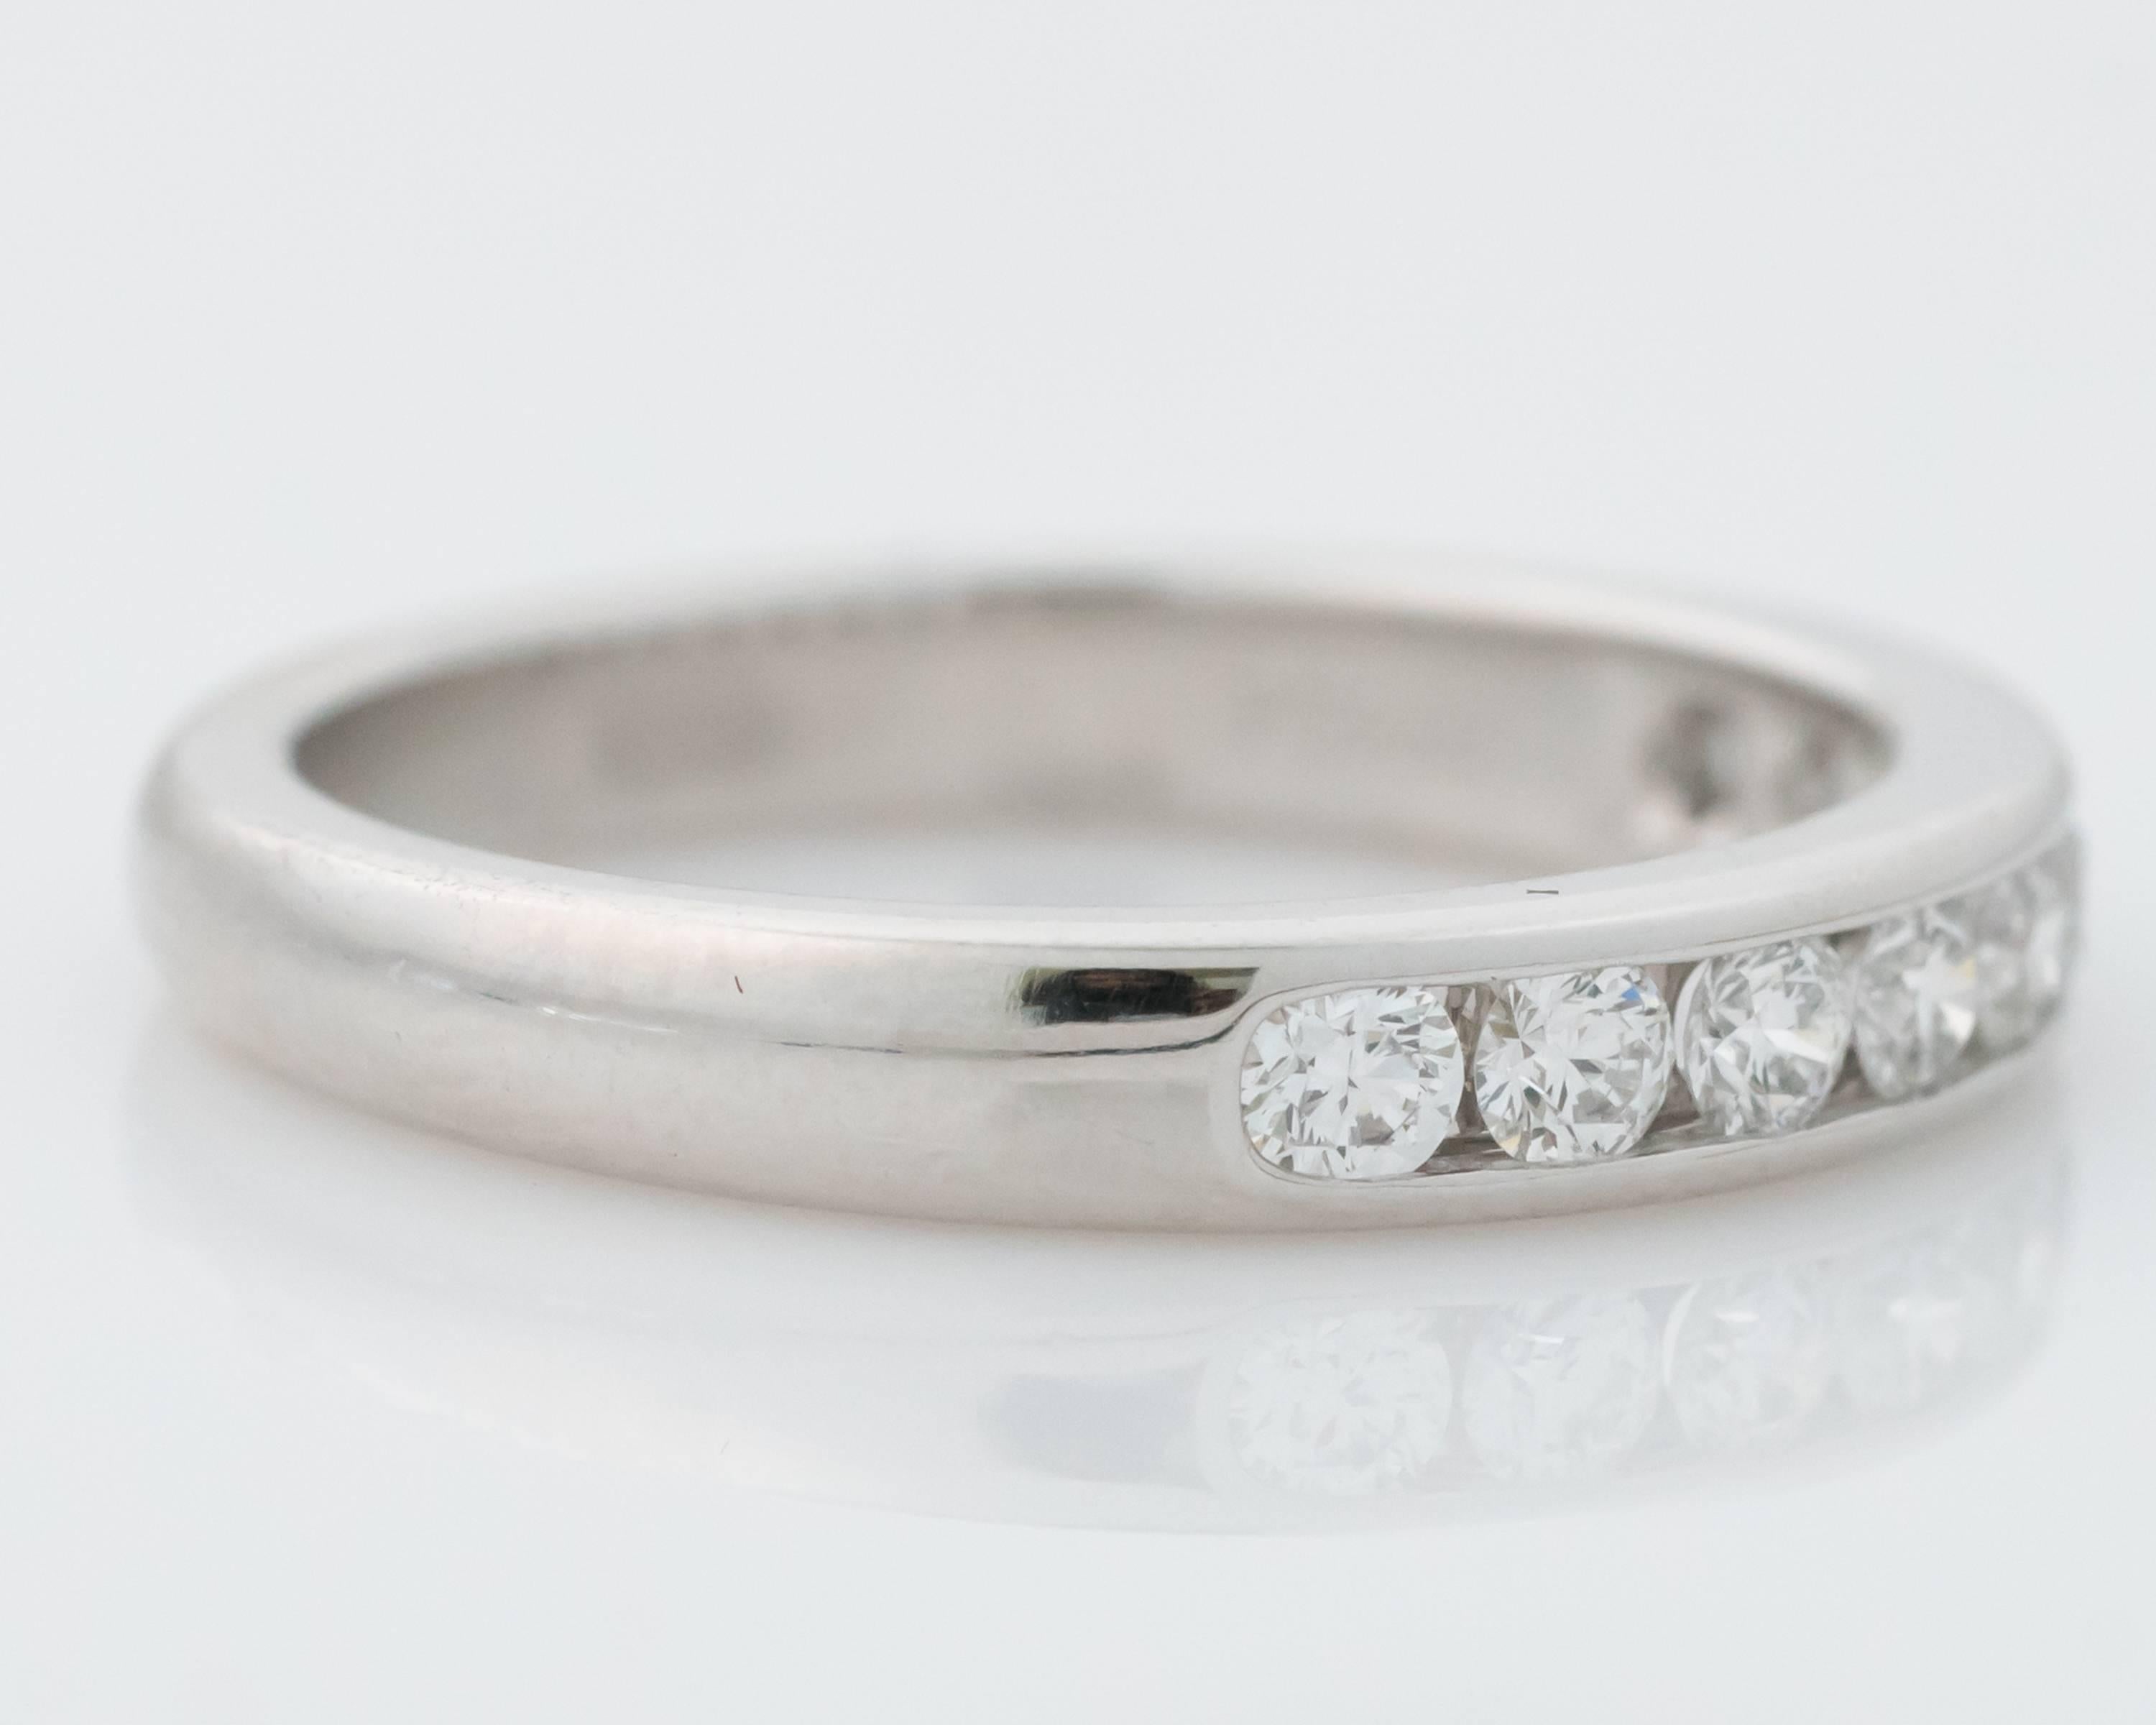 Beautiful, classic Tiffany & Co Halfway around Diamond Eternity band Ring Crafted in Platinum (hallmarked PT950) Also hallmarked Tiffany & Co Features 0.33 carats of diamonds, E color and VS1 clarity  All diamonds are Channel-set This ring is 3